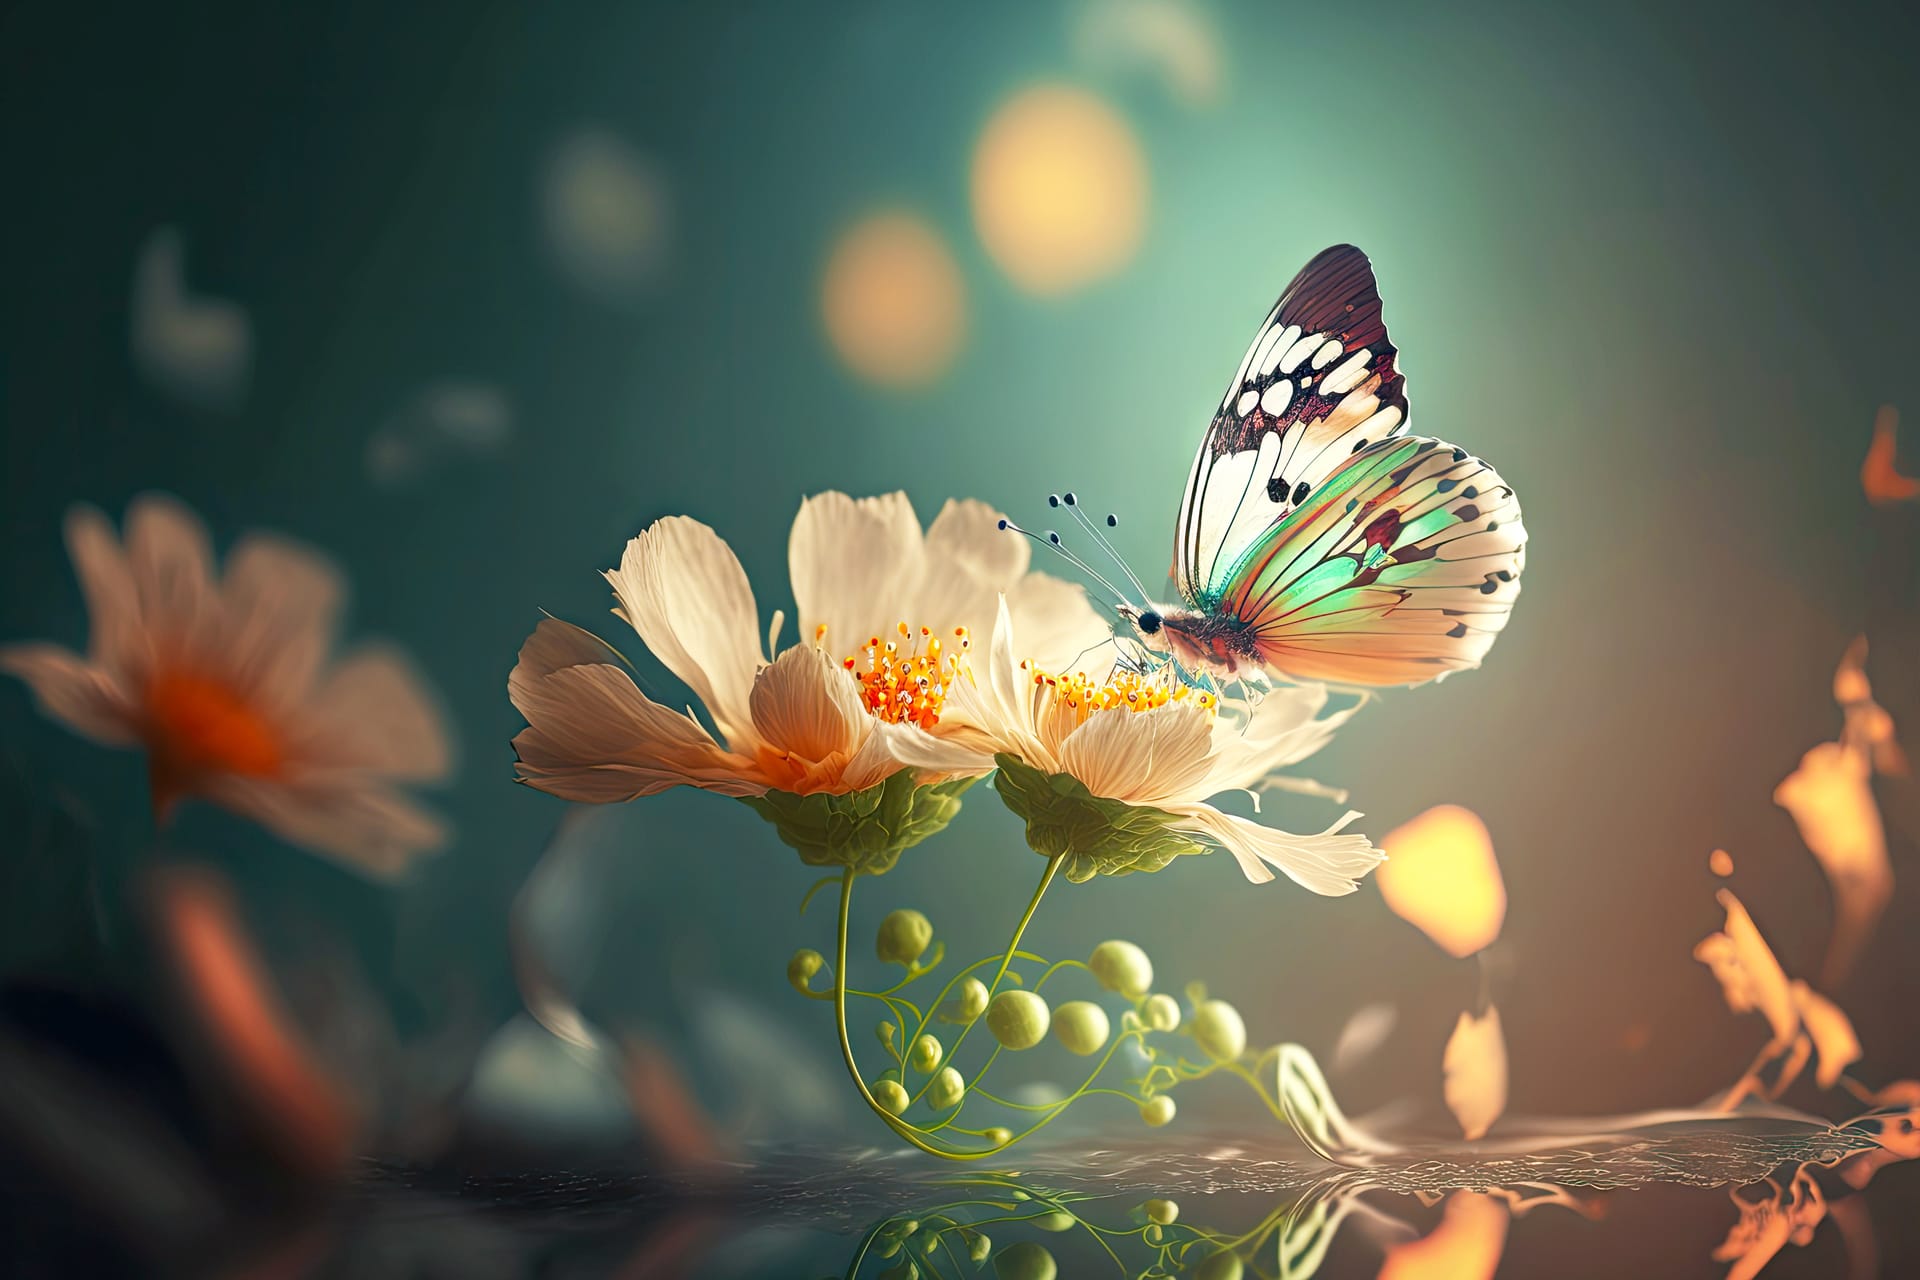 Delicate delicate flower butterfly lying down blurred background butterfly image